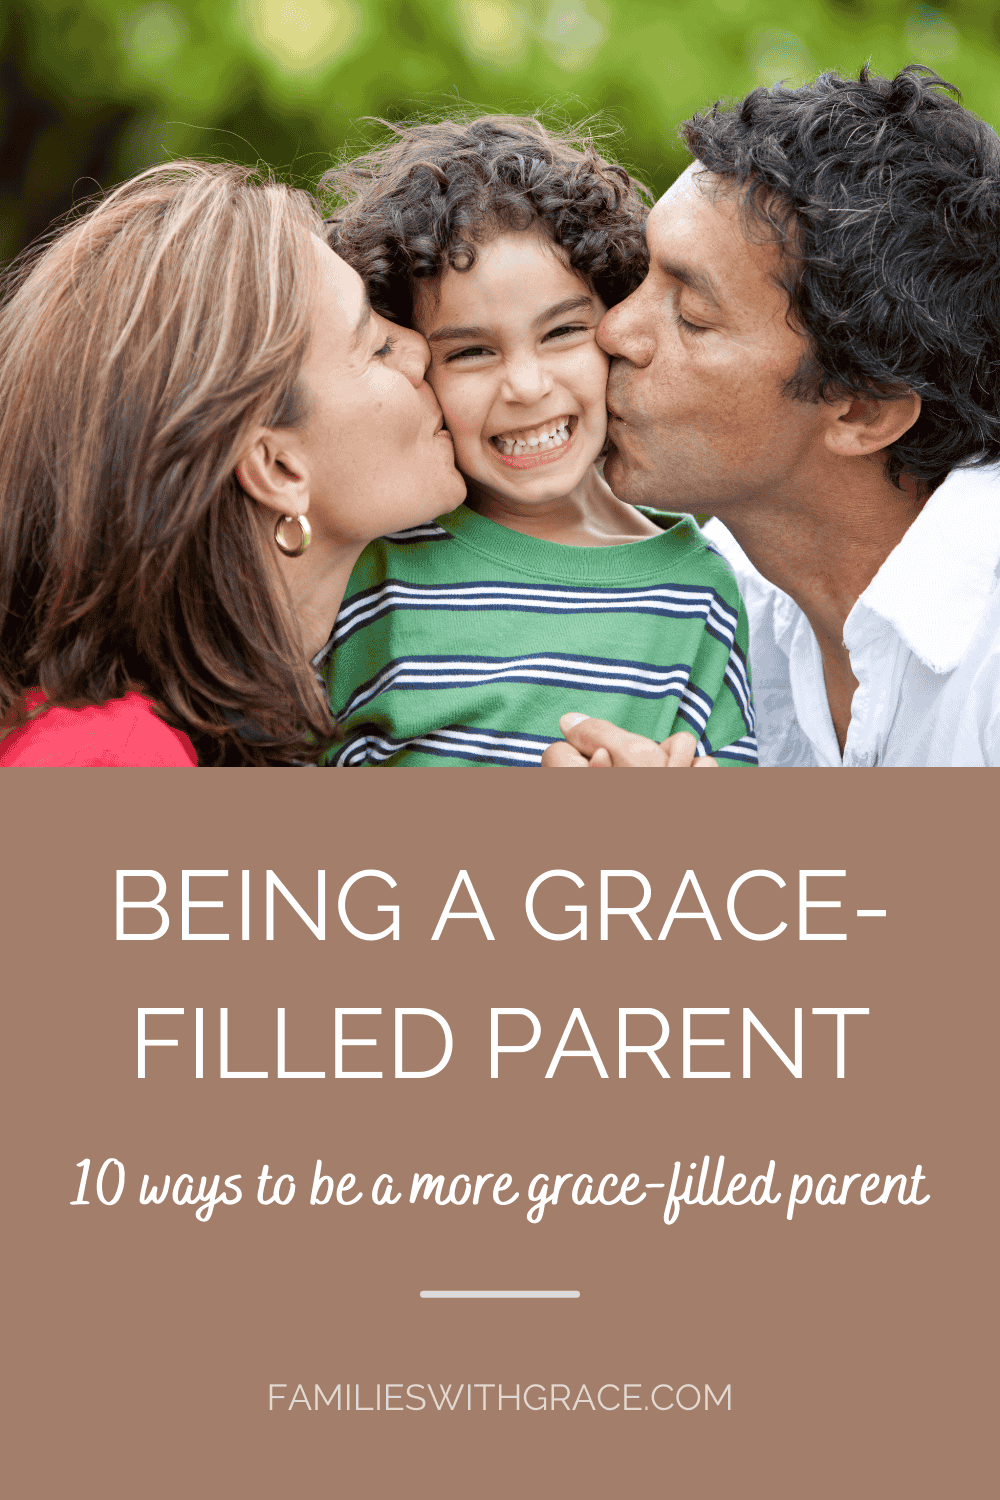 Being a grace-filled parent